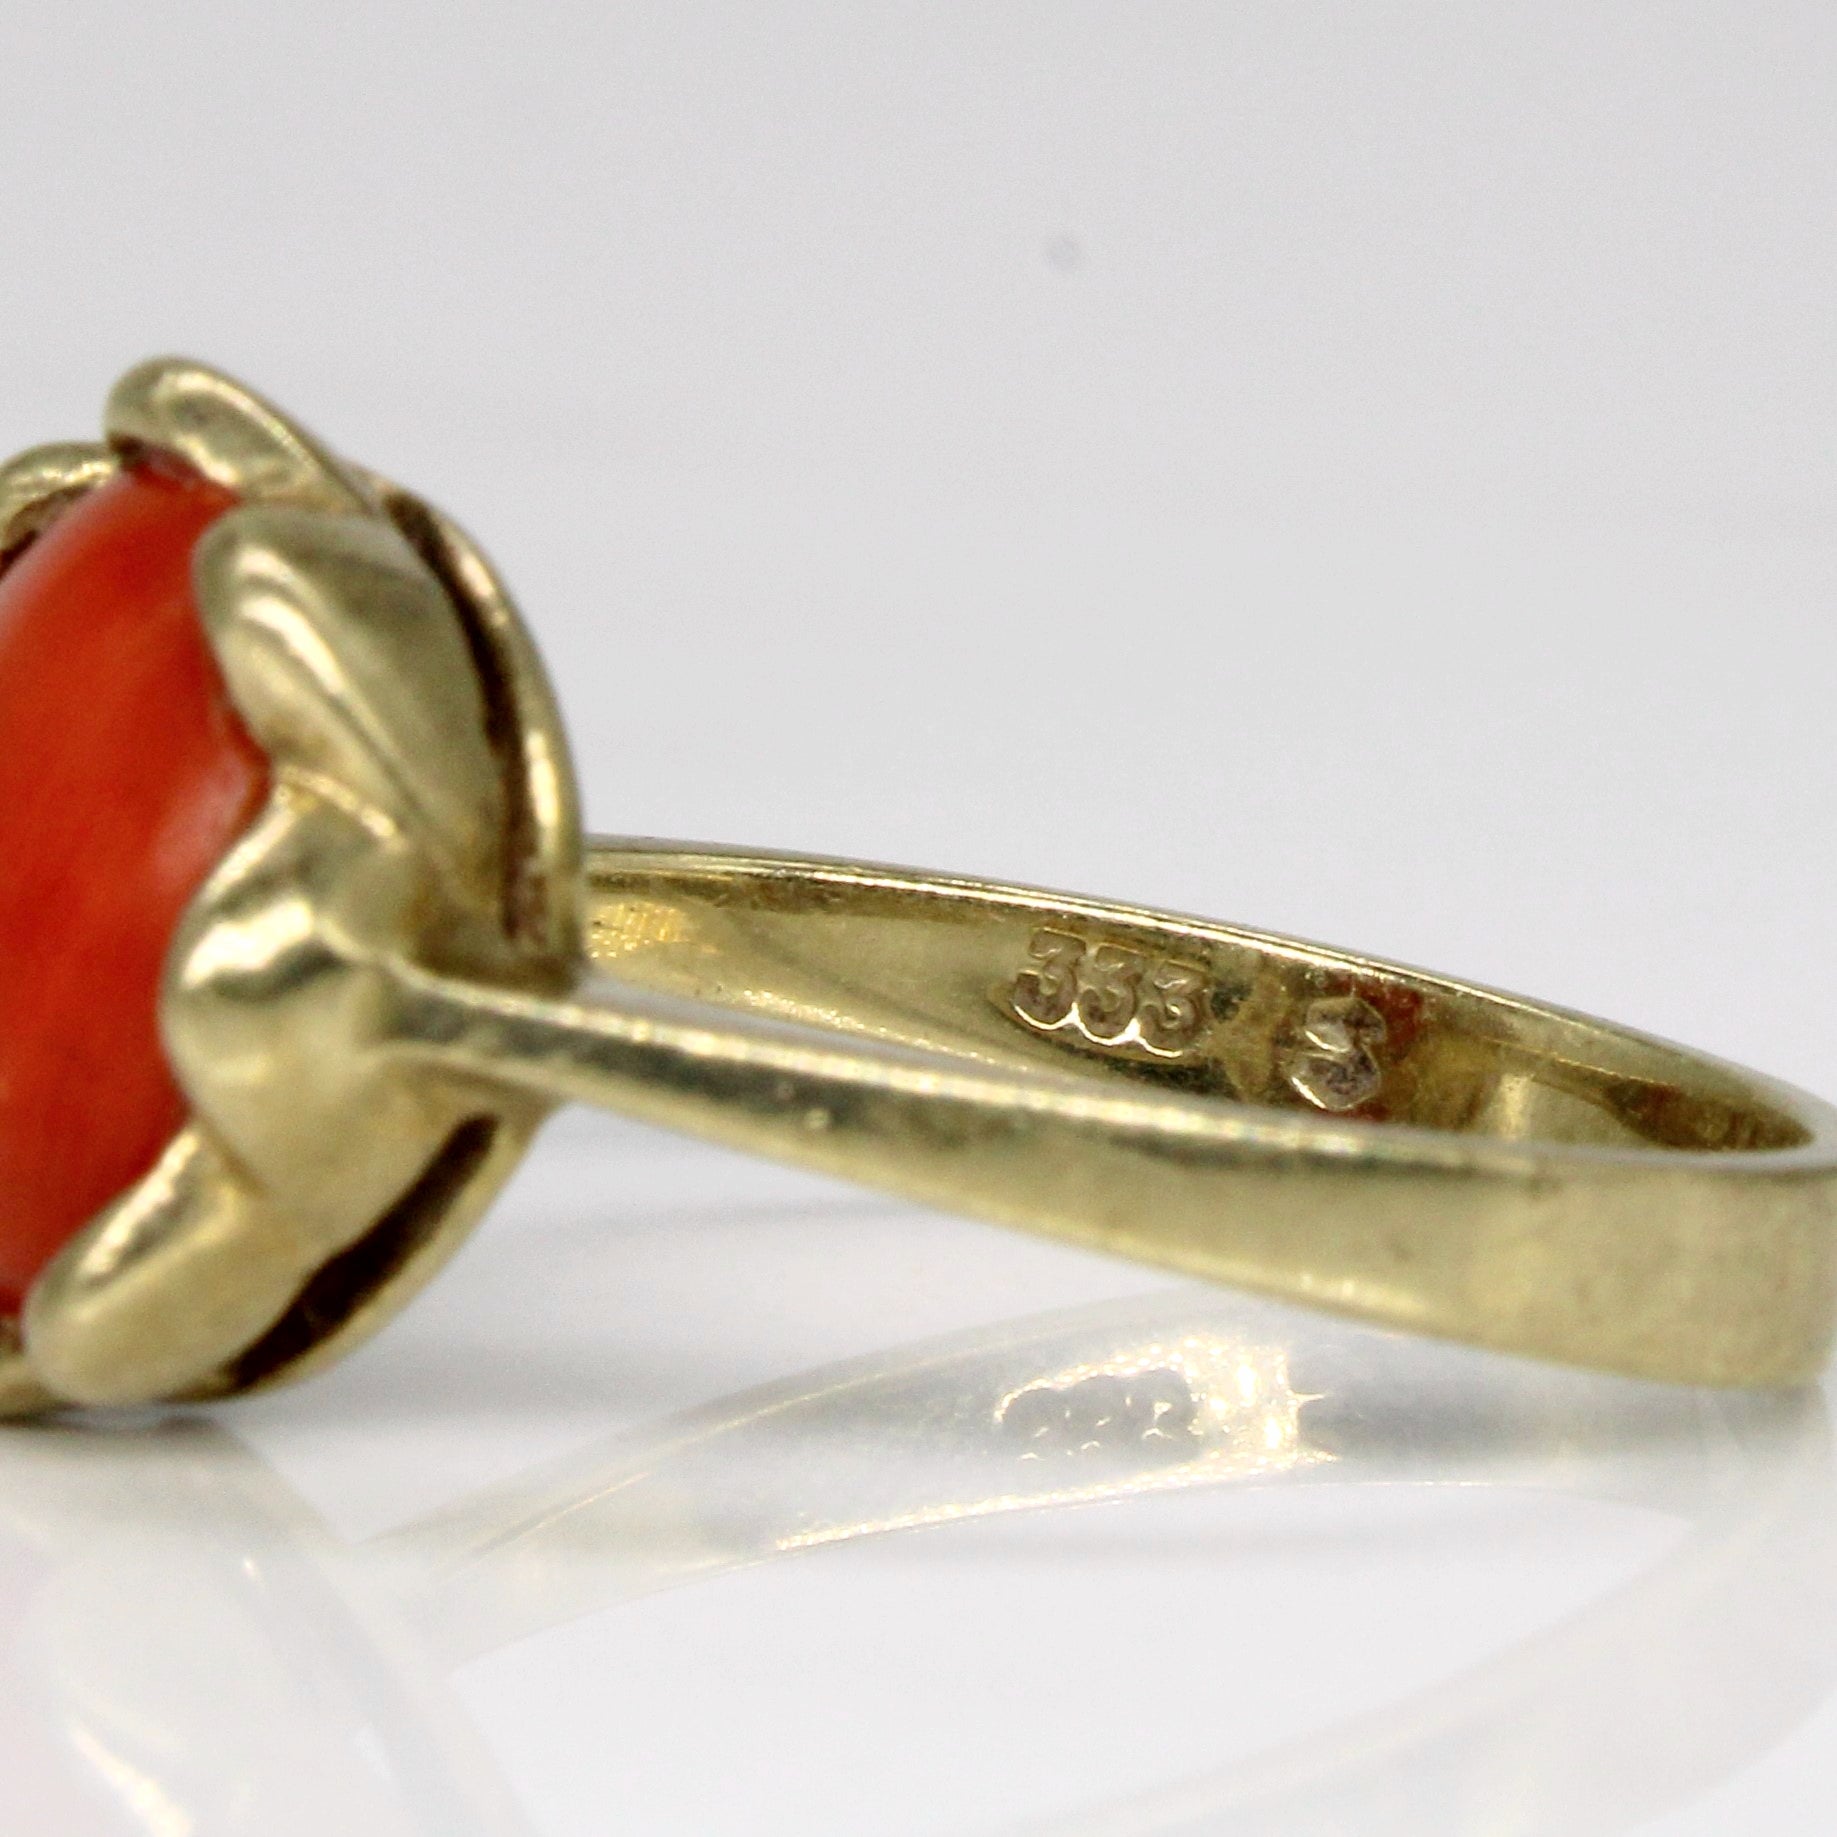 Coral Flower Cocktail Ring | 1.67ct | SZ 6.75 |